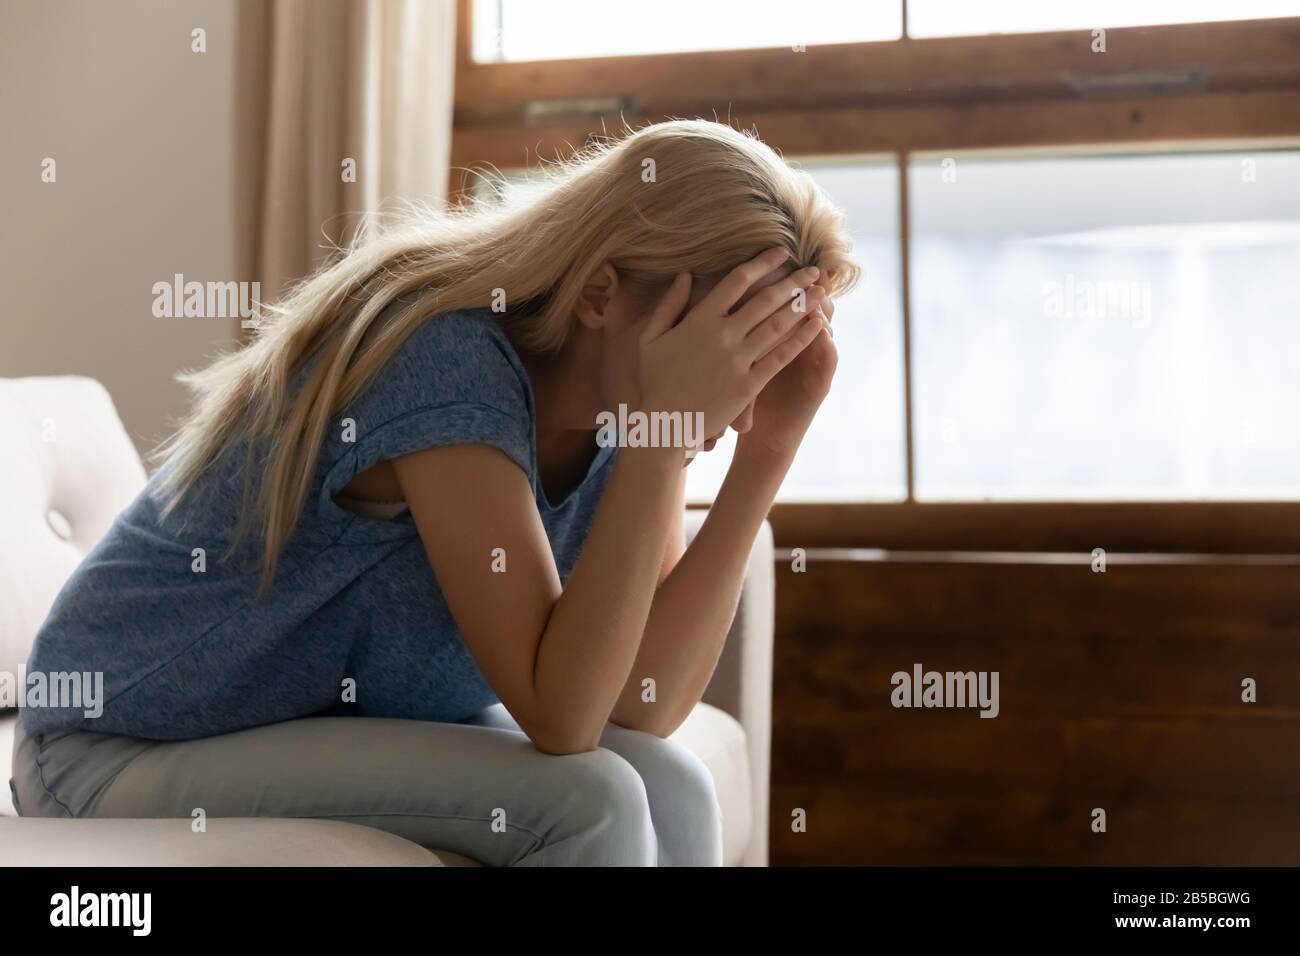 Unhappy young woman lost in thoughts having problems Stock Photo